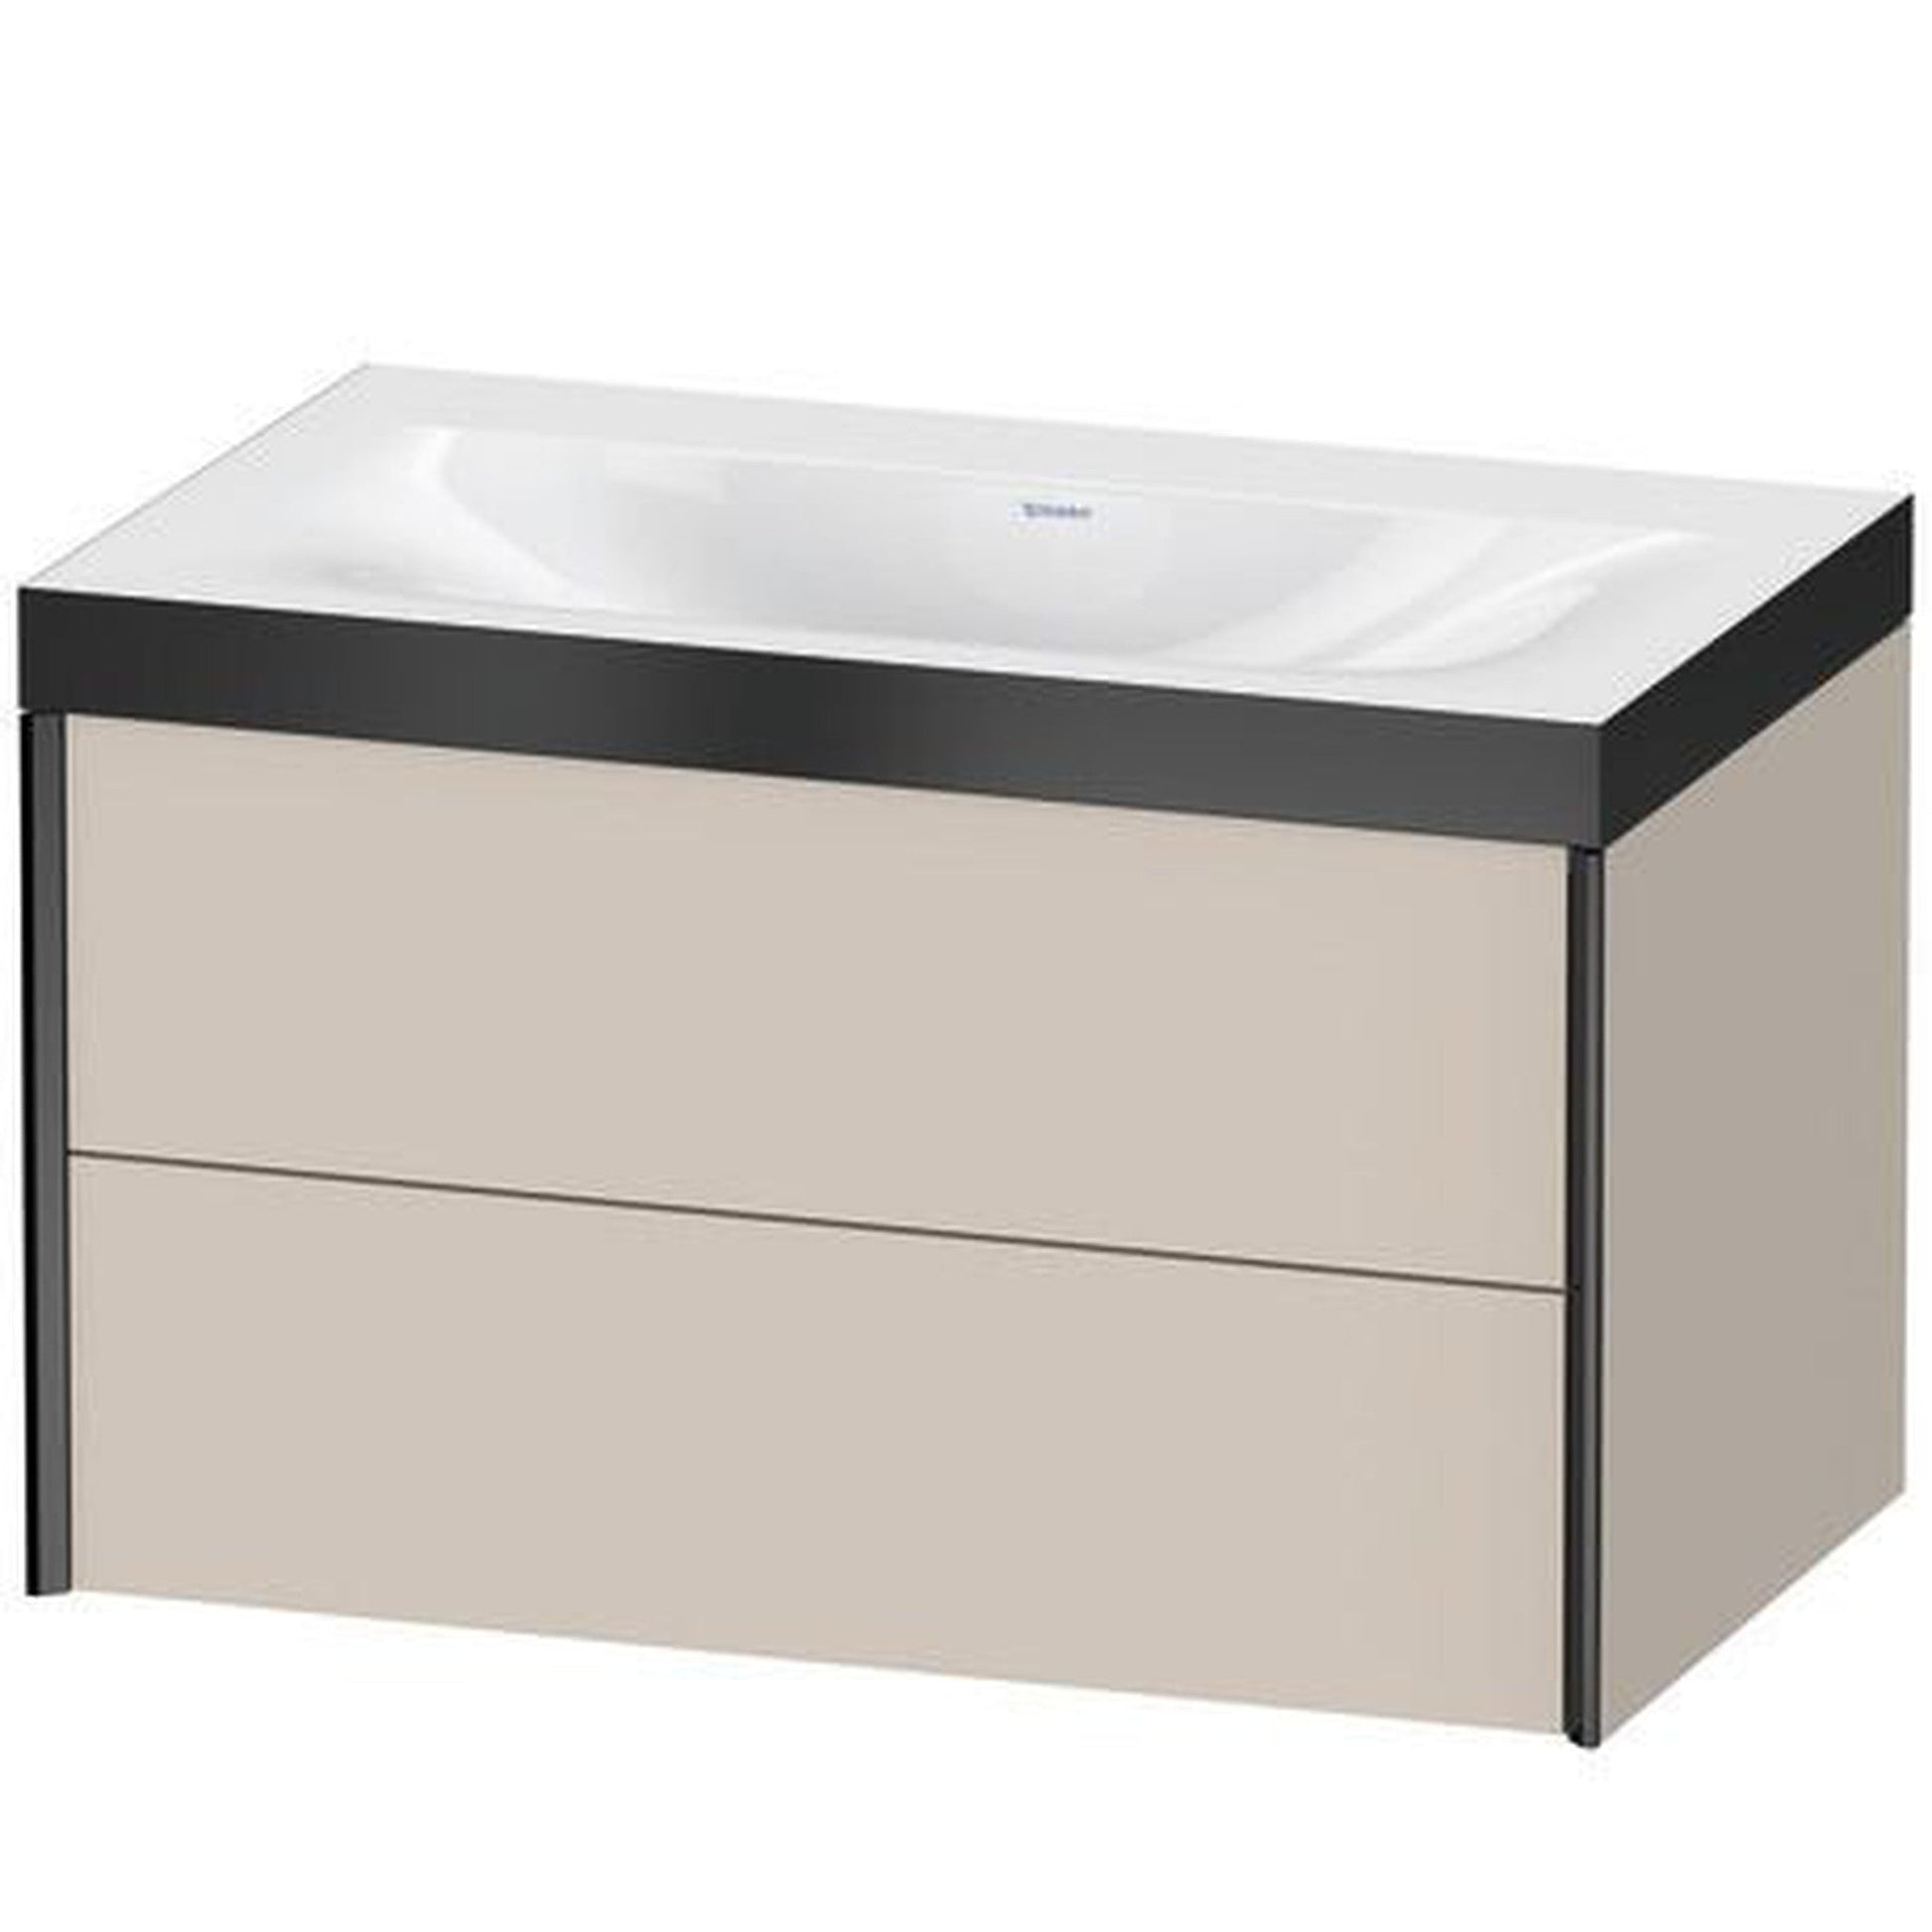 Duravit Xviu 31" x 20" x 19" Two Drawer C-Bonded Wall-Mount Vanity Kit Without Tap Hole, Taupe (XV4615NB291P)